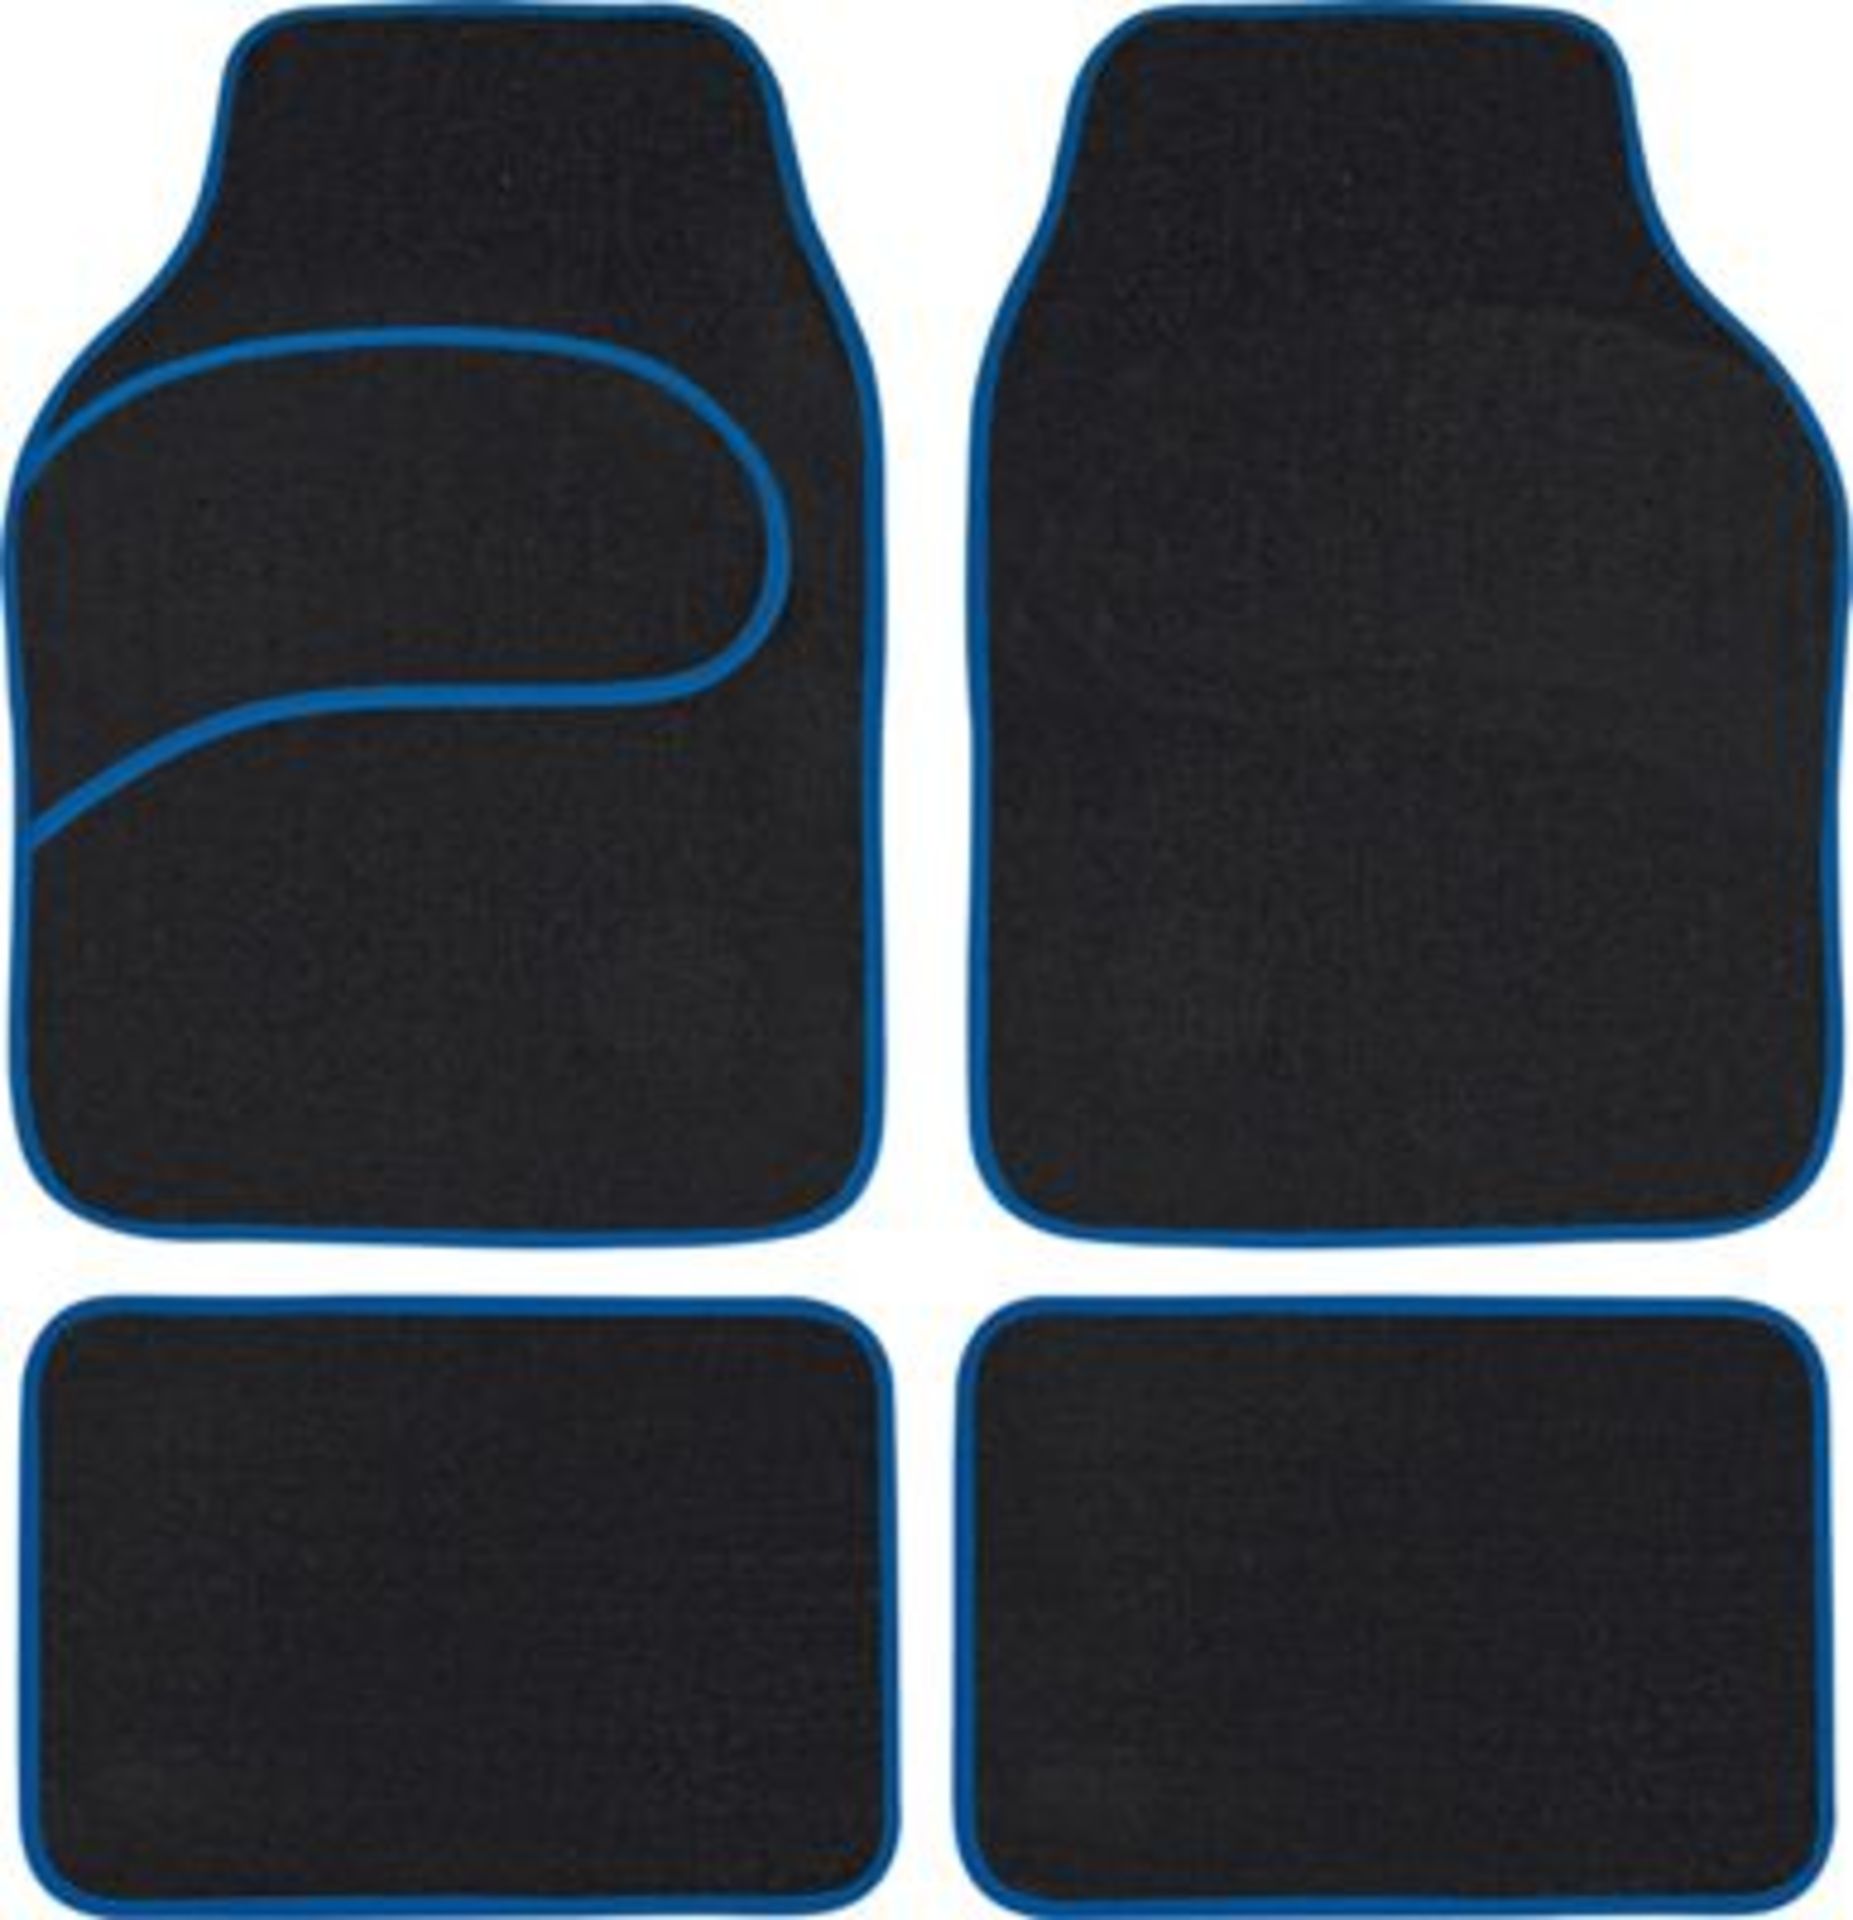 V *TRADE QTY* Brand New Set of 4 Universal Fit Car Mats (Item does not have blue trim) X 4 YOUR